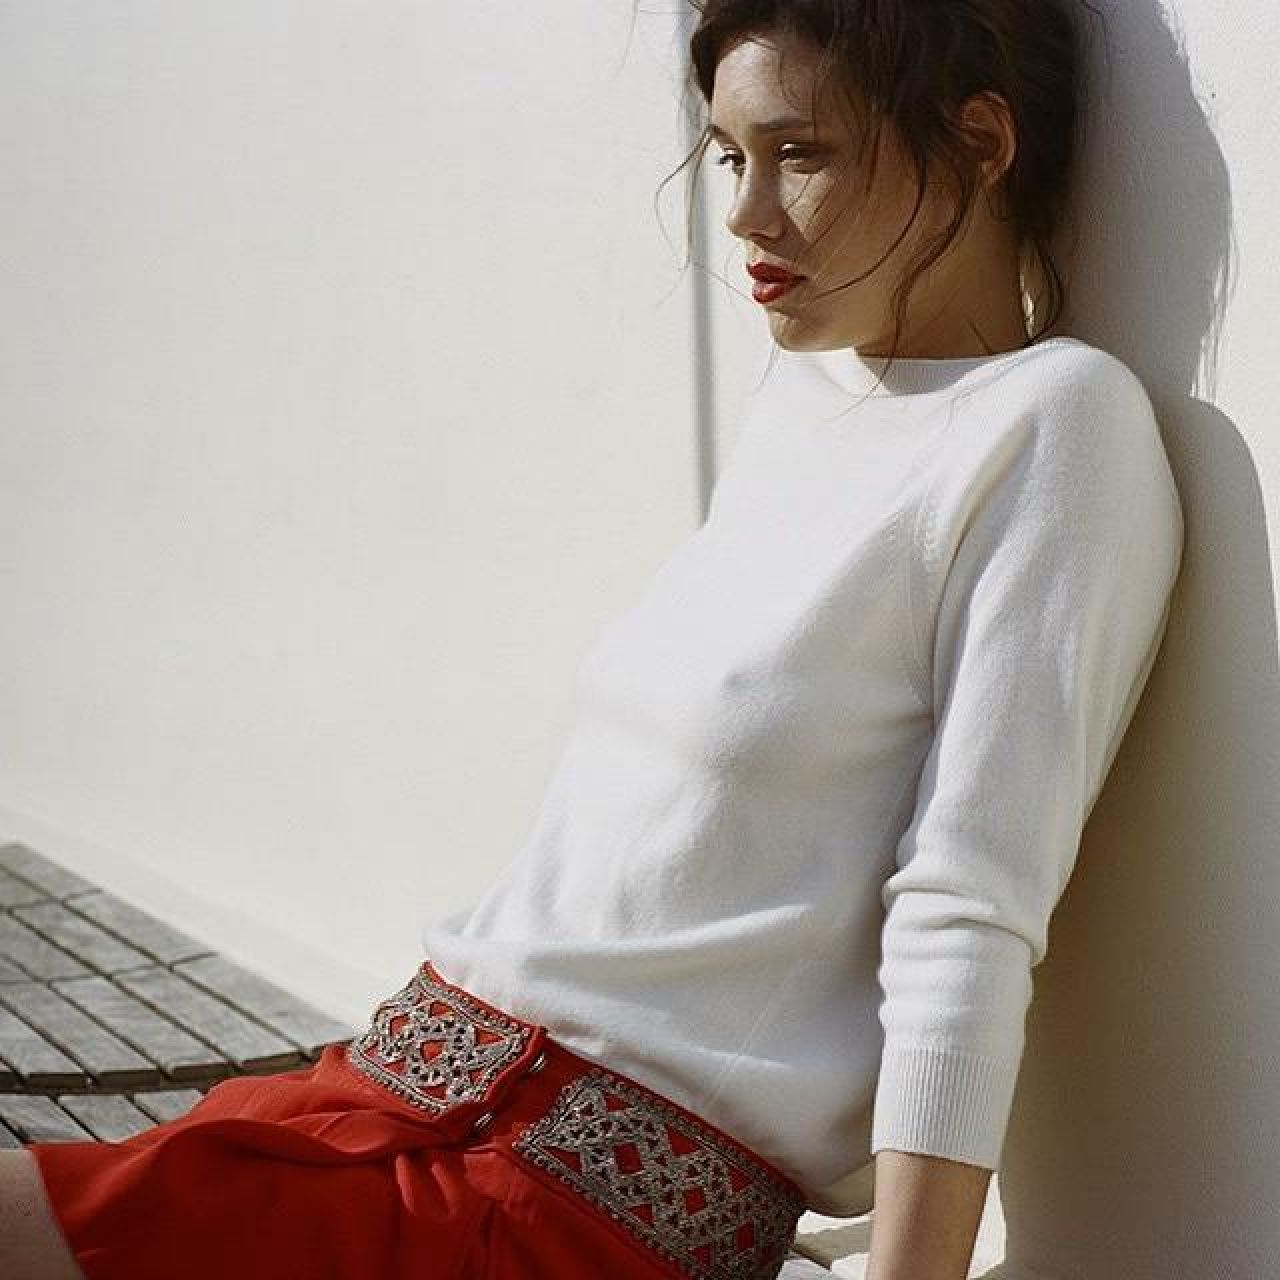 Red skirt of Àstrid Bergès-Frisbey on the account Instagram of @abergesfris...